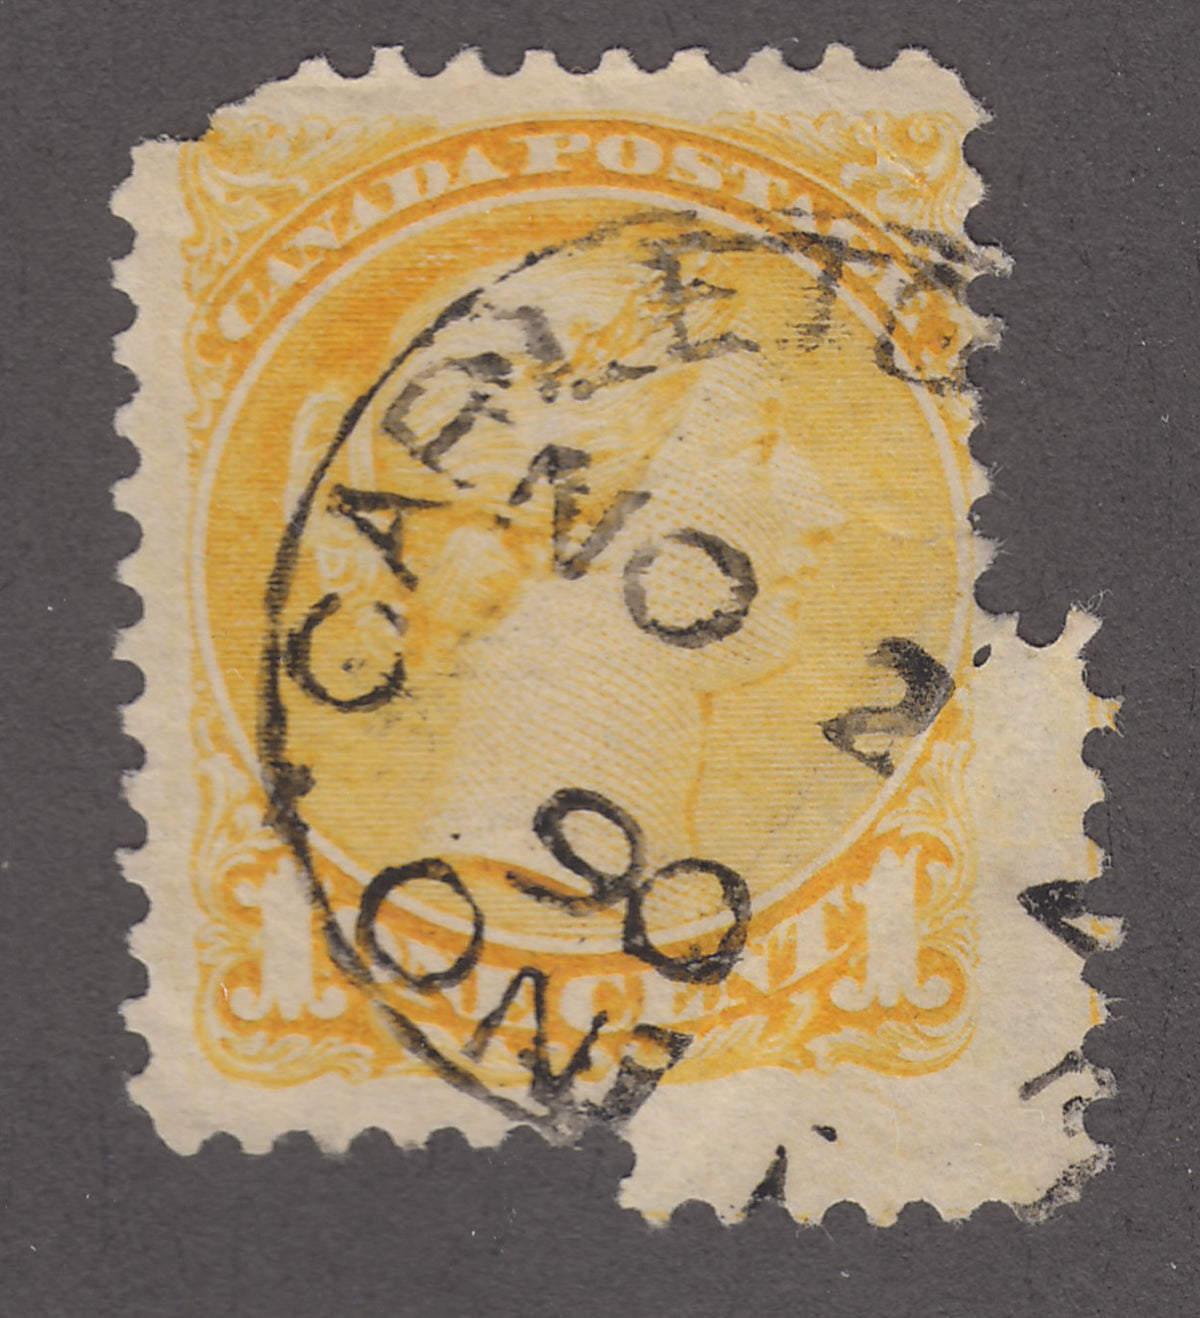 0035CA1707 - Canada #35 - Used, Miss-perf Variety